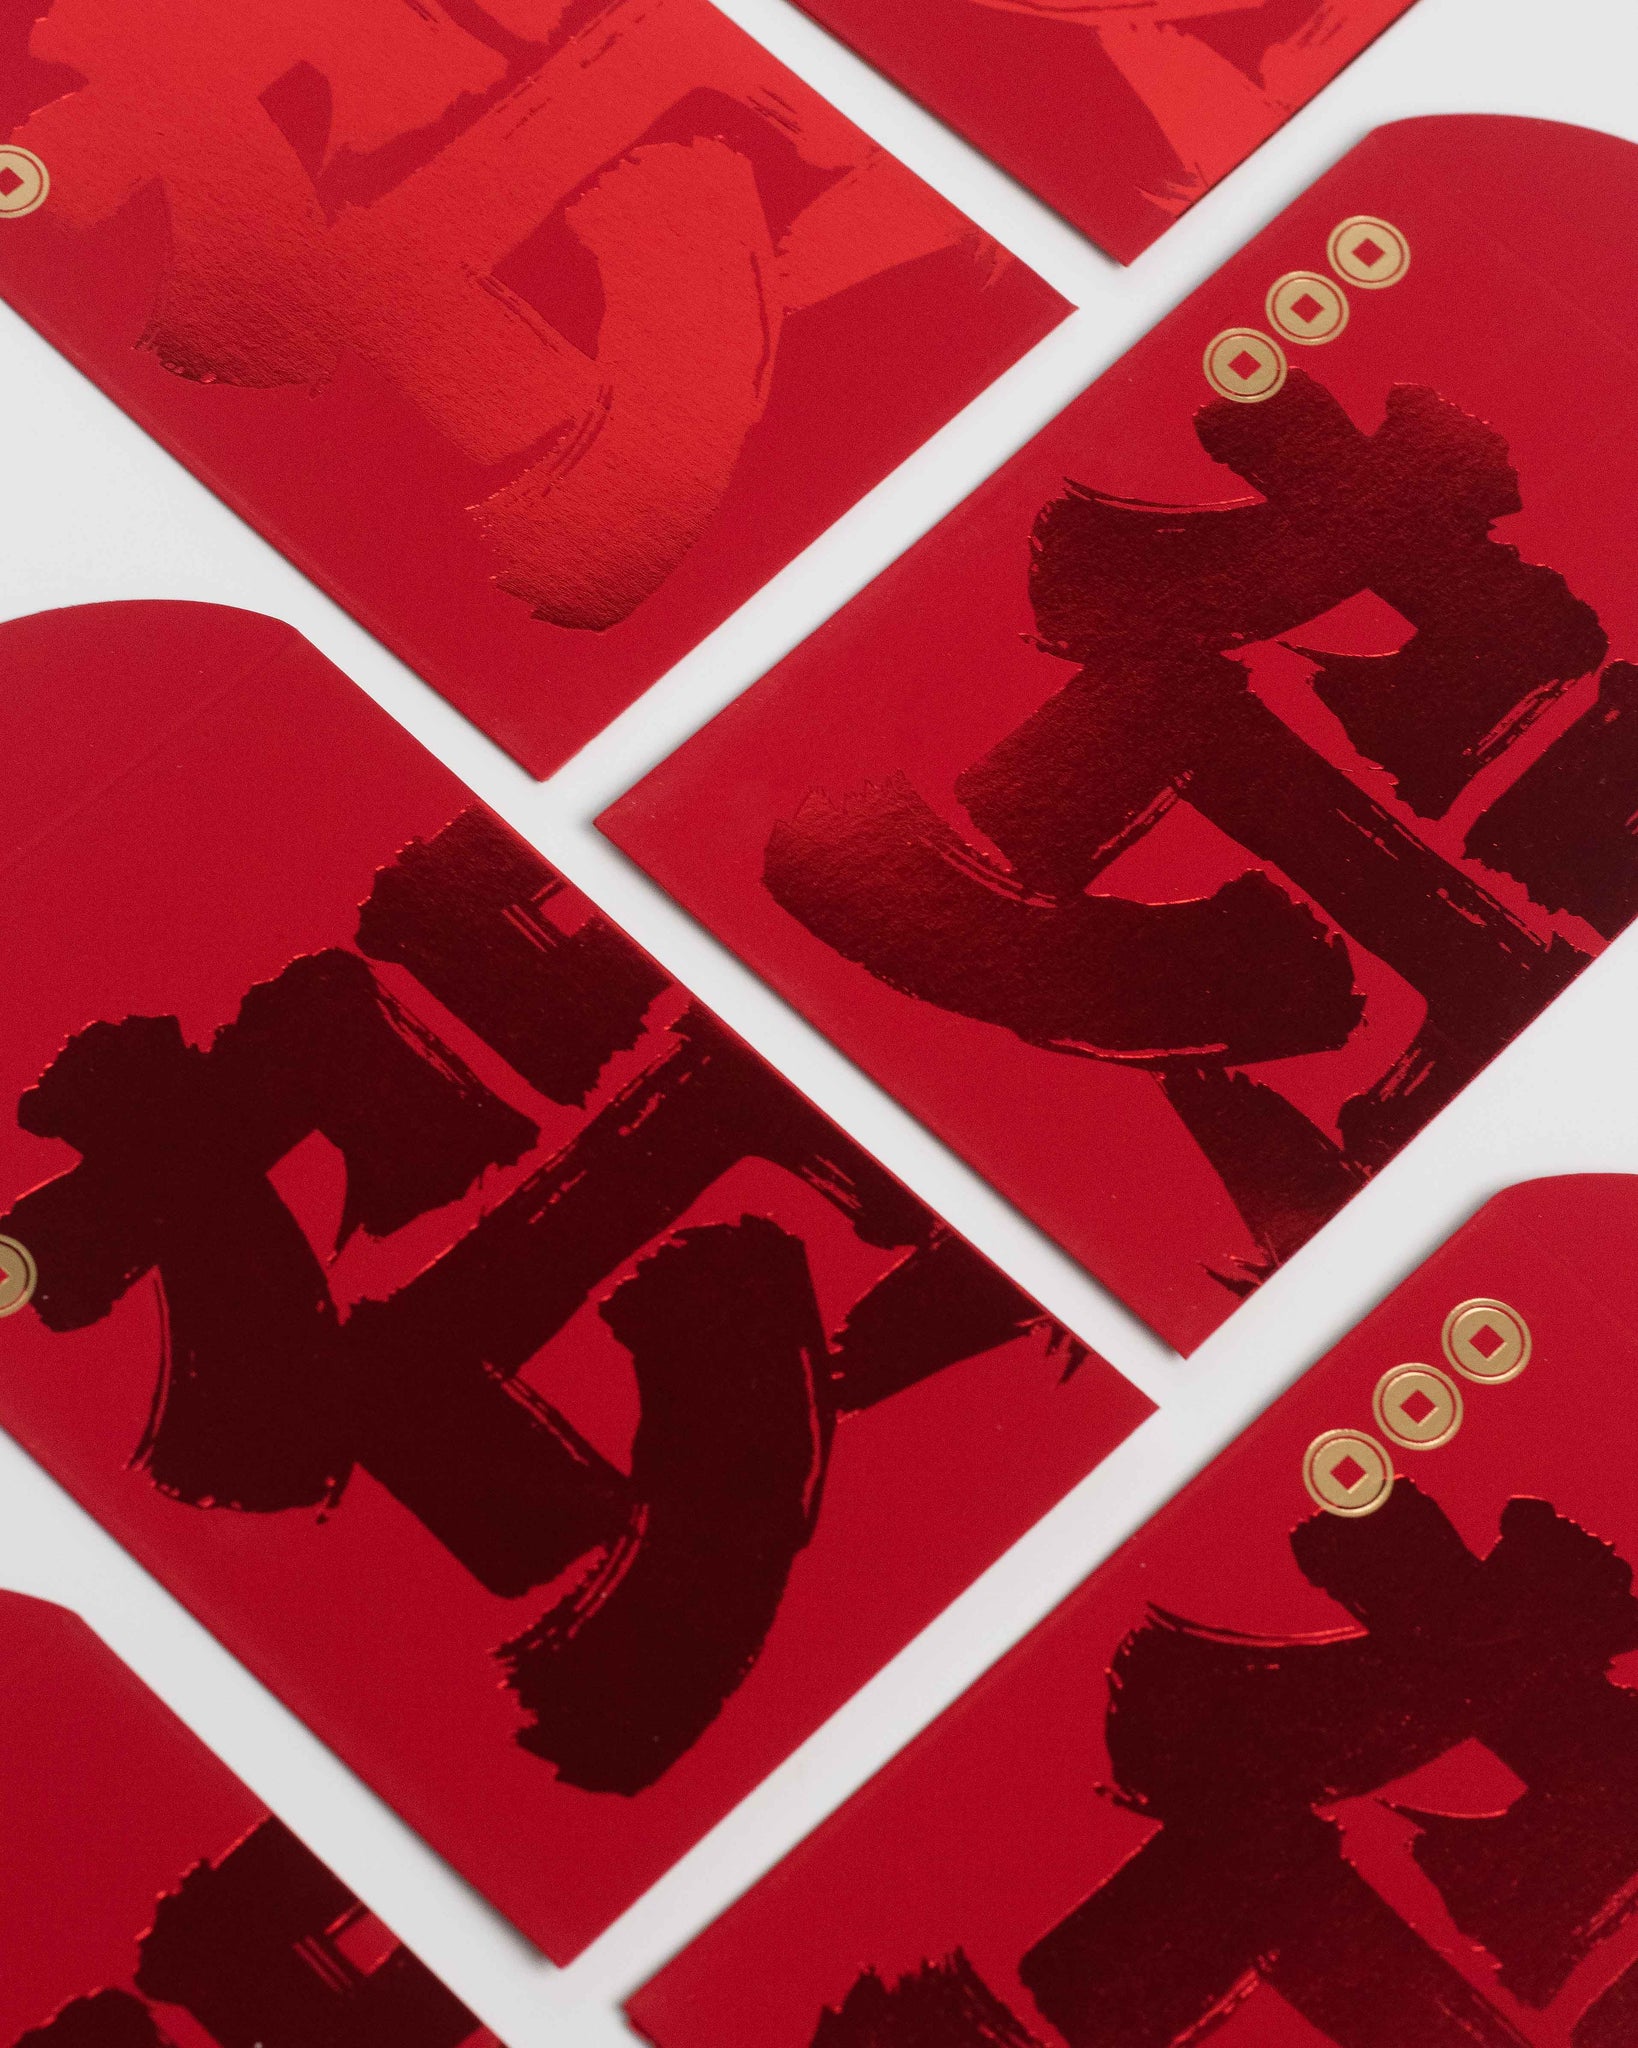 HYANG STUDIO Miscellaneous "Good Wishes" Red Envelopes